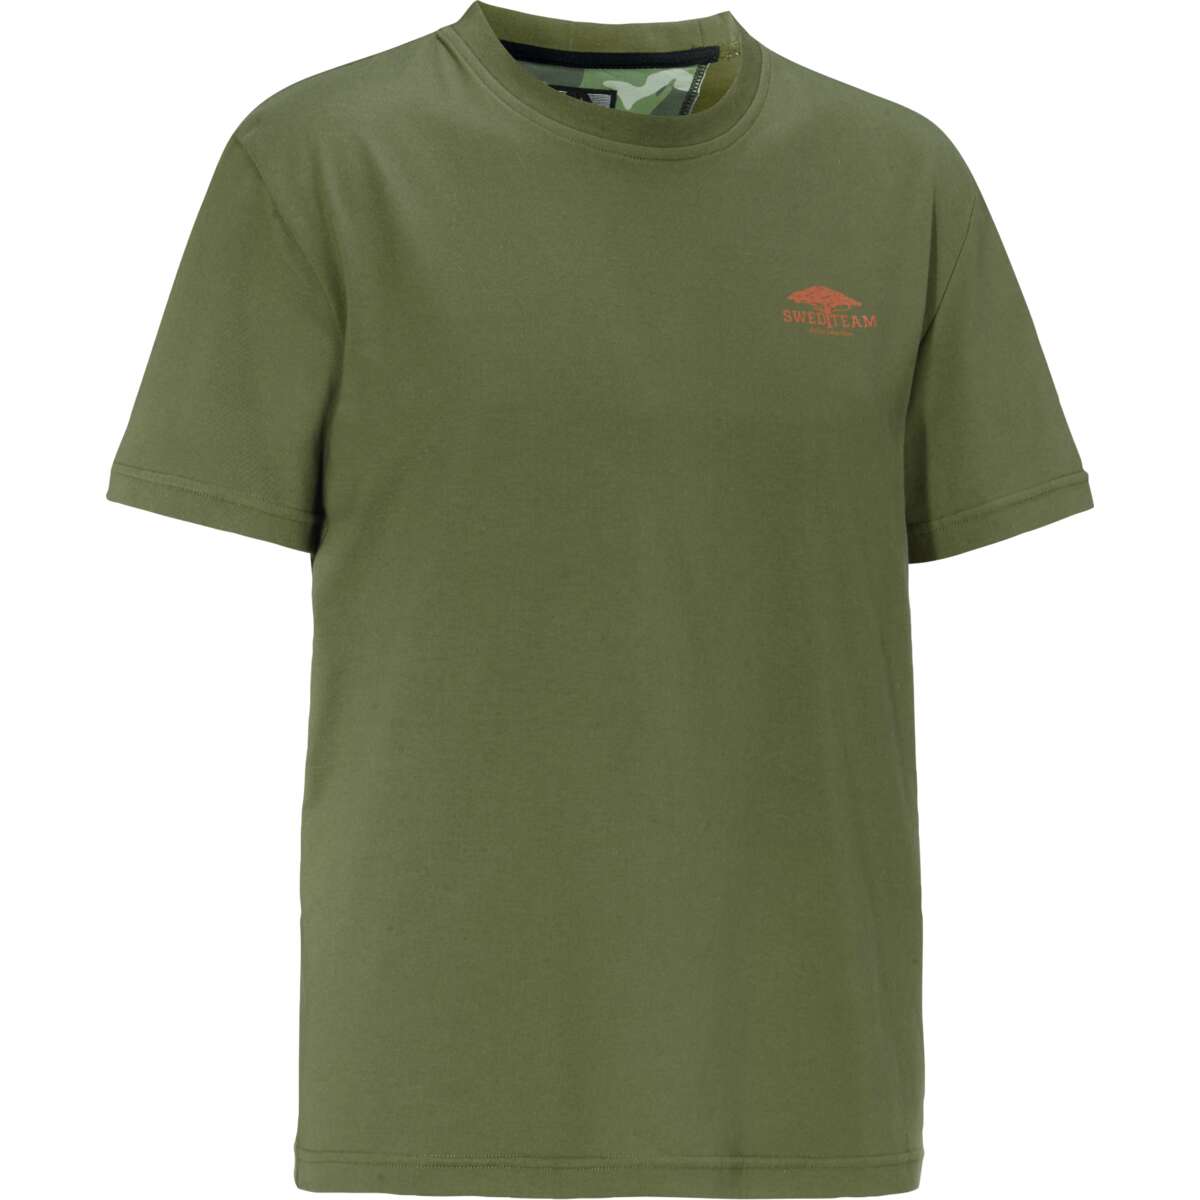 Oakes M Swedteam T-shirt: Comfort and classic style in 100% breathable cotton